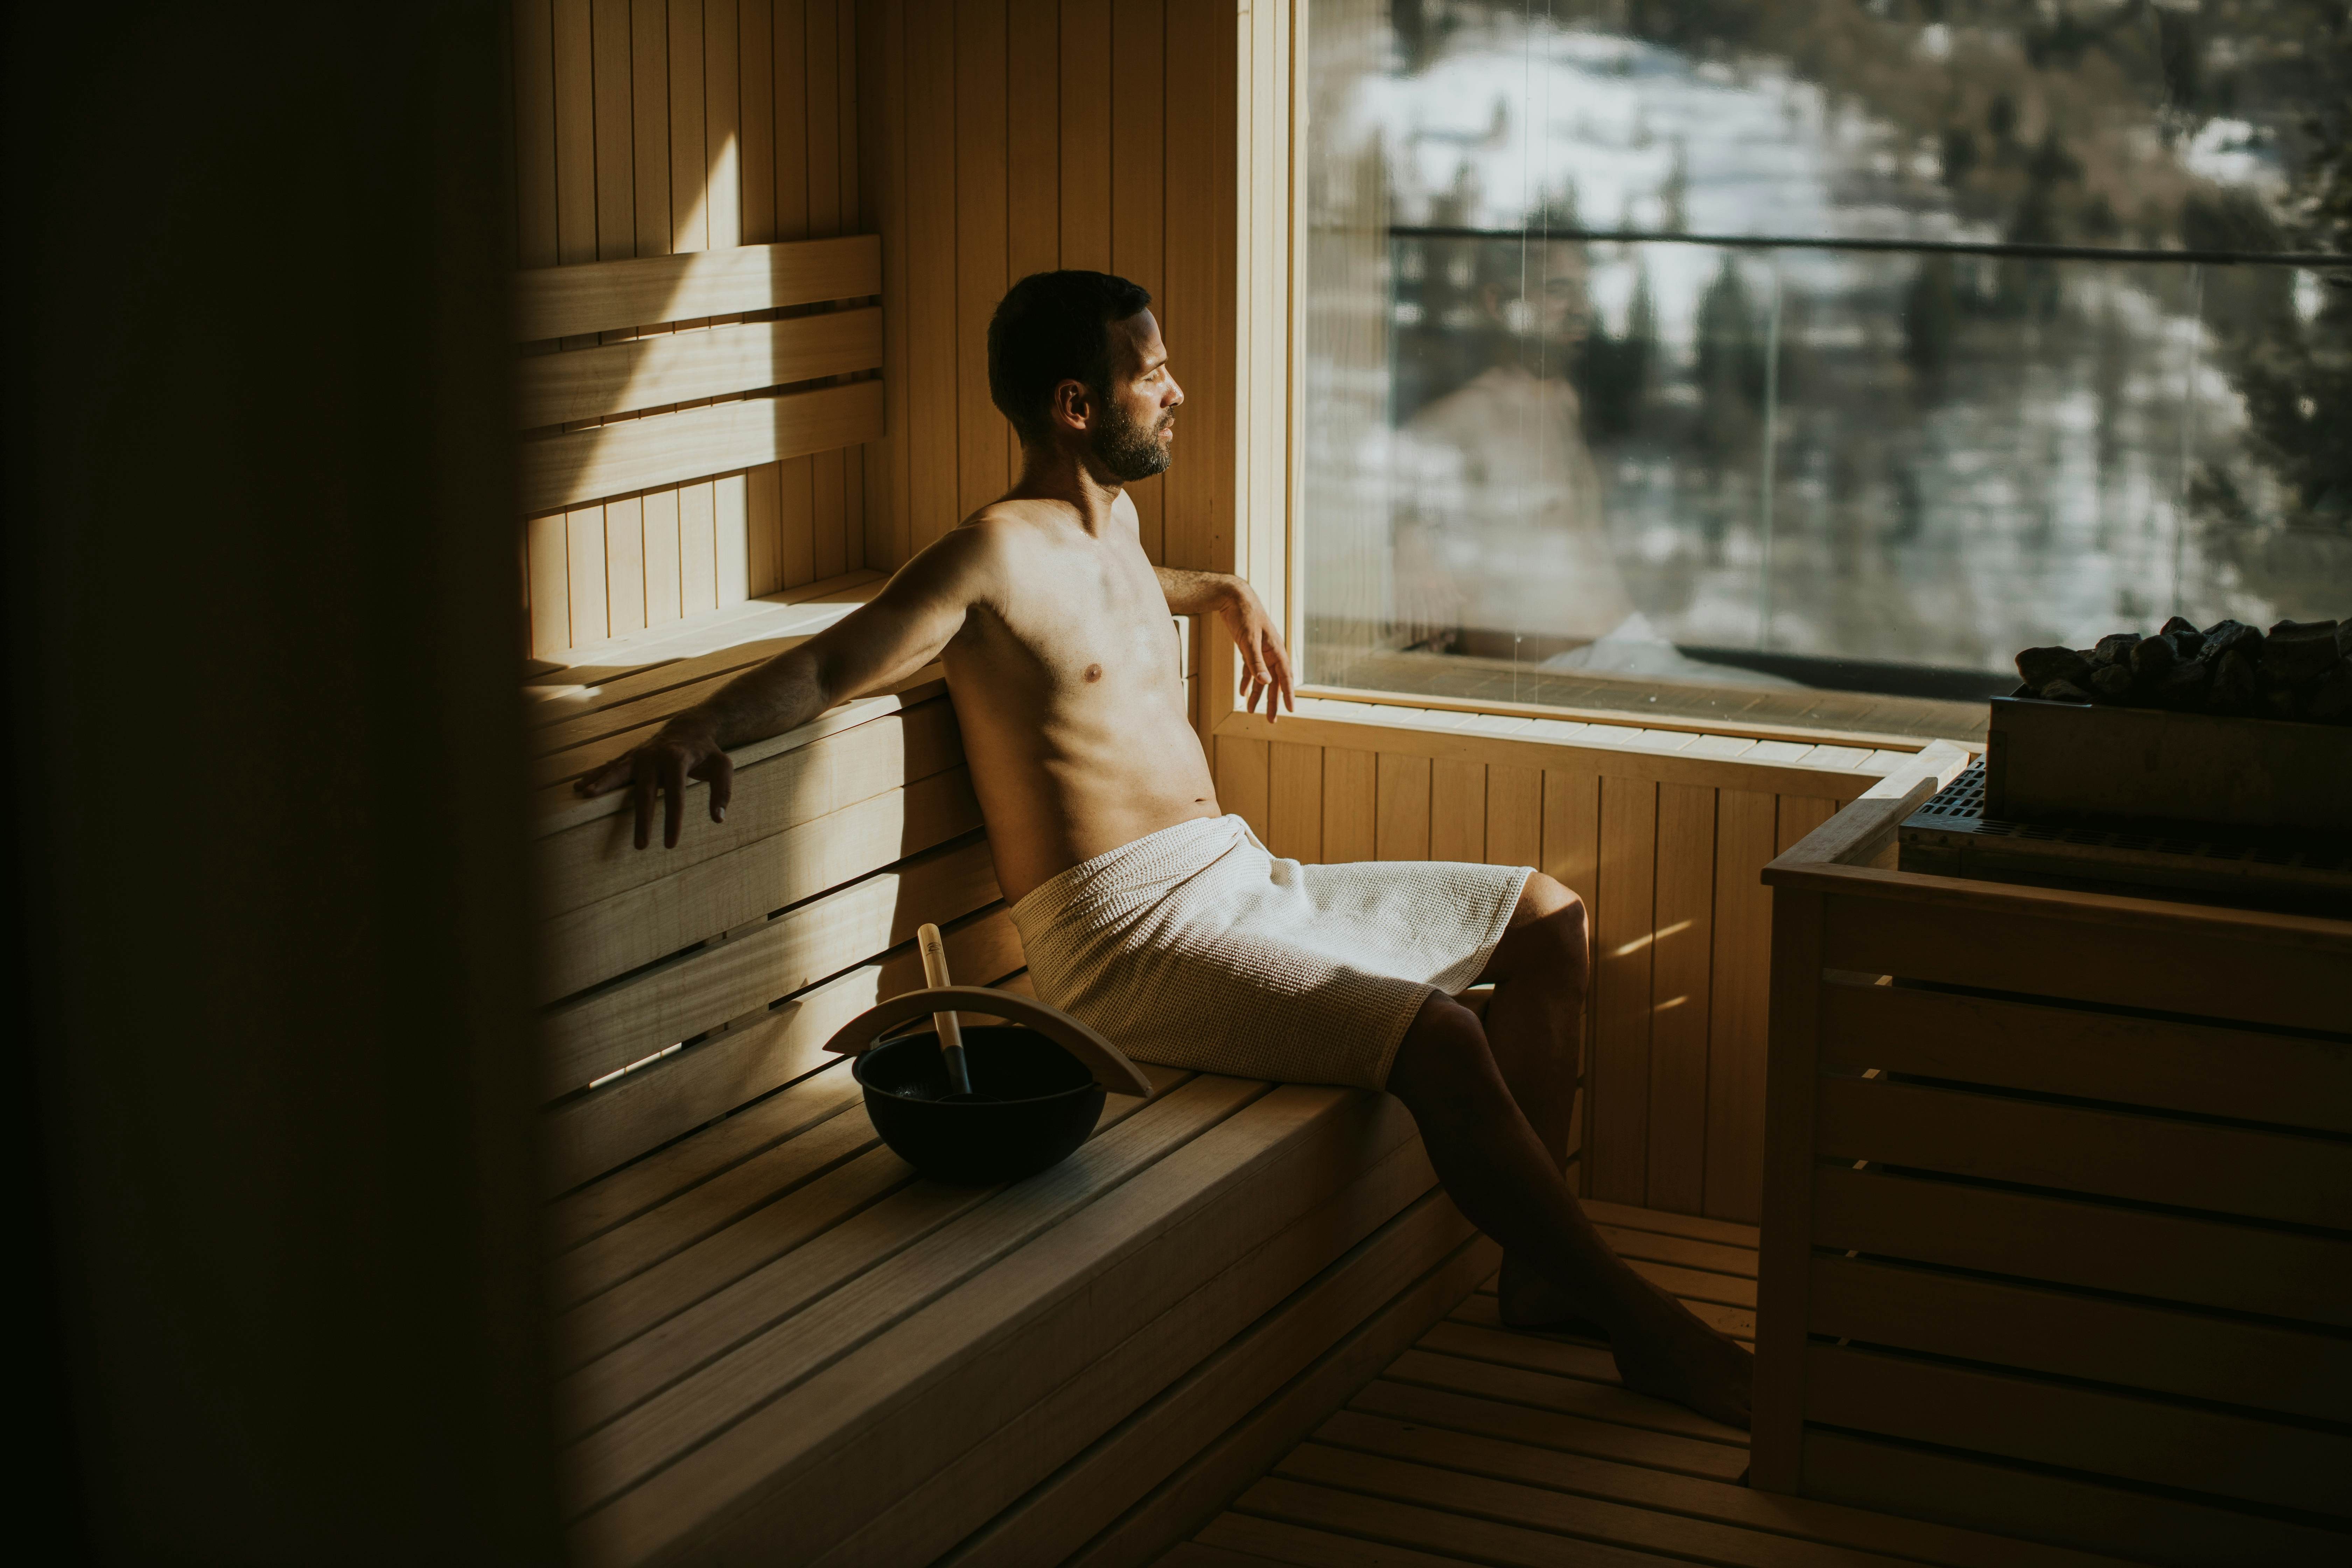 How to enjoy Finland's sauna culture - Lonely Planet